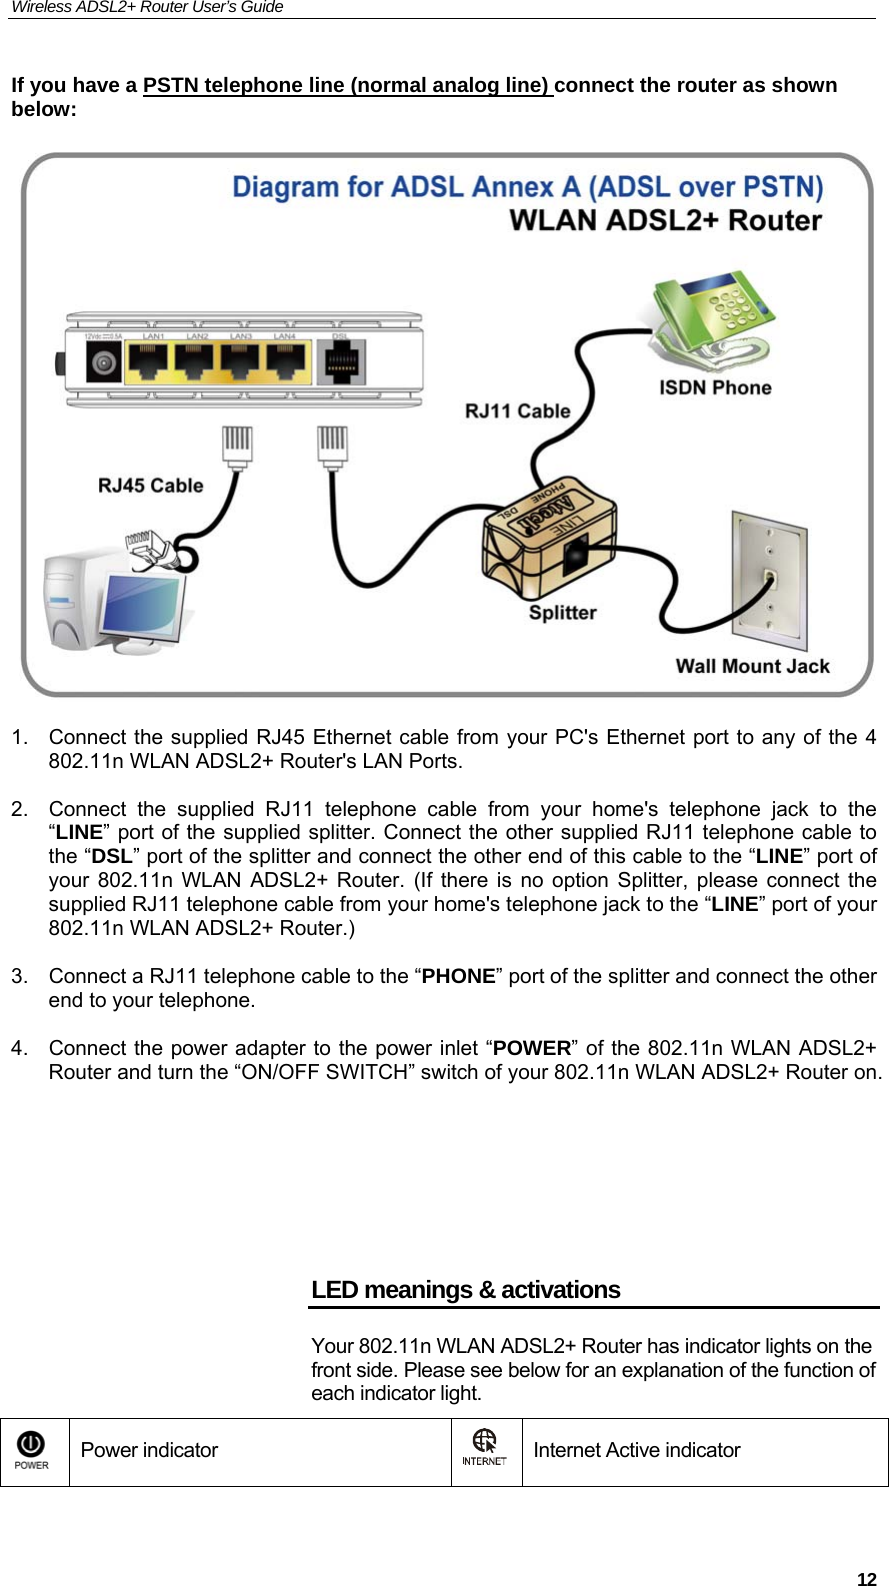 Wireless ADSL2+ Router User’s Guide     12If you have a PSTN telephone line (normal analog line) connect the router as shown below:     1.  Connect the supplied RJ45 Ethernet cable from your PC&apos;s Ethernet port to any of the 4 802.11n WLAN ADSL2+ Router&apos;s LAN Ports.  2.  Connect the supplied RJ11 telephone cable from your home&apos;s telephone jack to the “LINE” port of the supplied splitter. Connect the other supplied RJ11 telephone cable to the “DSL” port of the splitter and connect the other end of this cable to the “LINE” port of your 802.11n WLAN ADSL2+ Router. (If there is no option Splitter, please connect the supplied RJ11 telephone cable from your home&apos;s telephone jack to the “LINE” port of your 802.11n WLAN ADSL2+ Router.)  3.  Connect a RJ11 telephone cable to the “PHONE” port of the splitter and connect the other end to your telephone.  4.  Connect the power adapter to the power inlet “POWER” of the 802.11n WLAN ADSL2+ Router and turn the “ON/OFF SWITCH” switch of your 802.11n WLAN ADSL2+ Router on.      LED meanings &amp; activations Your 802.11n WLAN ADSL2+ Router has indicator lights on the front side. Please see below for an explanation of the function of each indicator light.  Power indicator  Internet Active indicator 